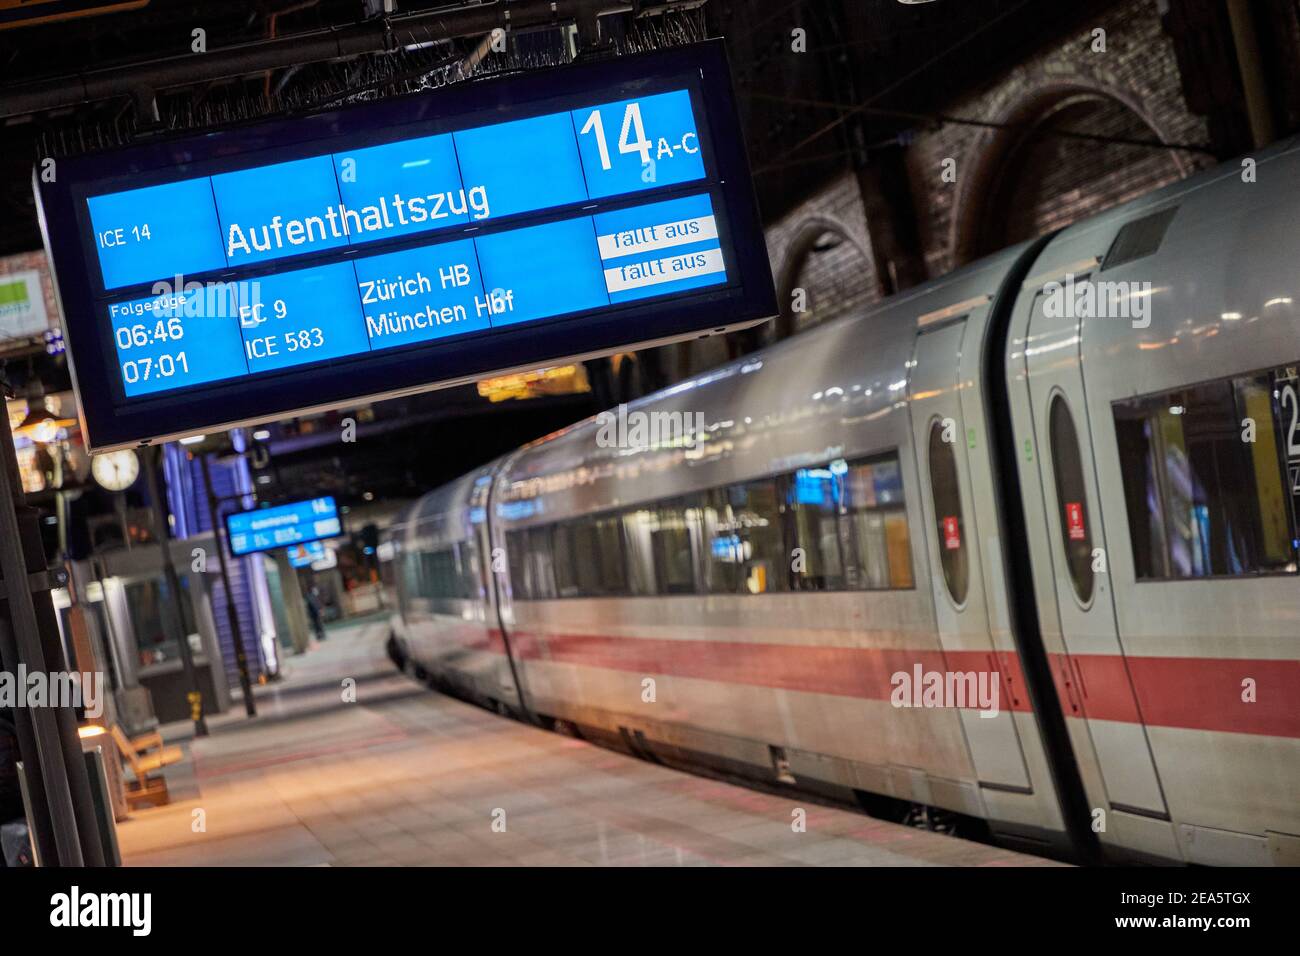 Hamburg, Germany. 08th Feb, 2021. A display board hangs above a platform in  Hamburg's main train station with notices about a "stalling train" and train  cancellations for connections to Zurich and Munich.